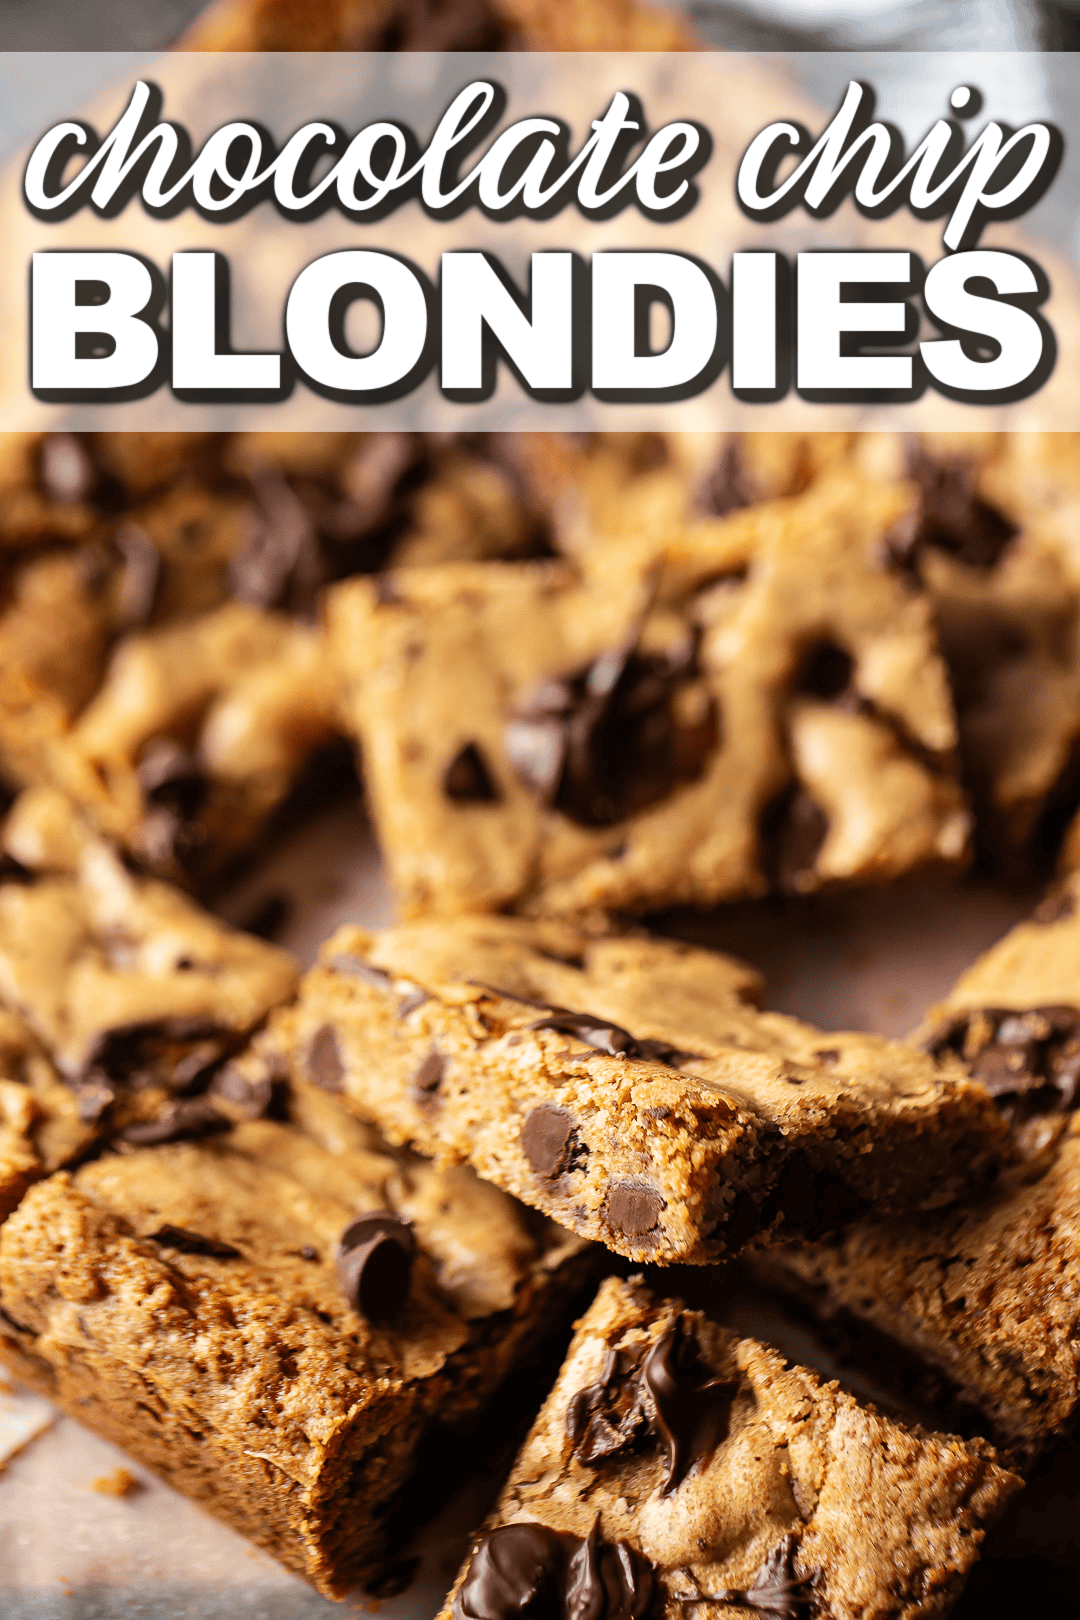 Blondie chocolate chip shown from the side to showcase the moist, chewy texture.